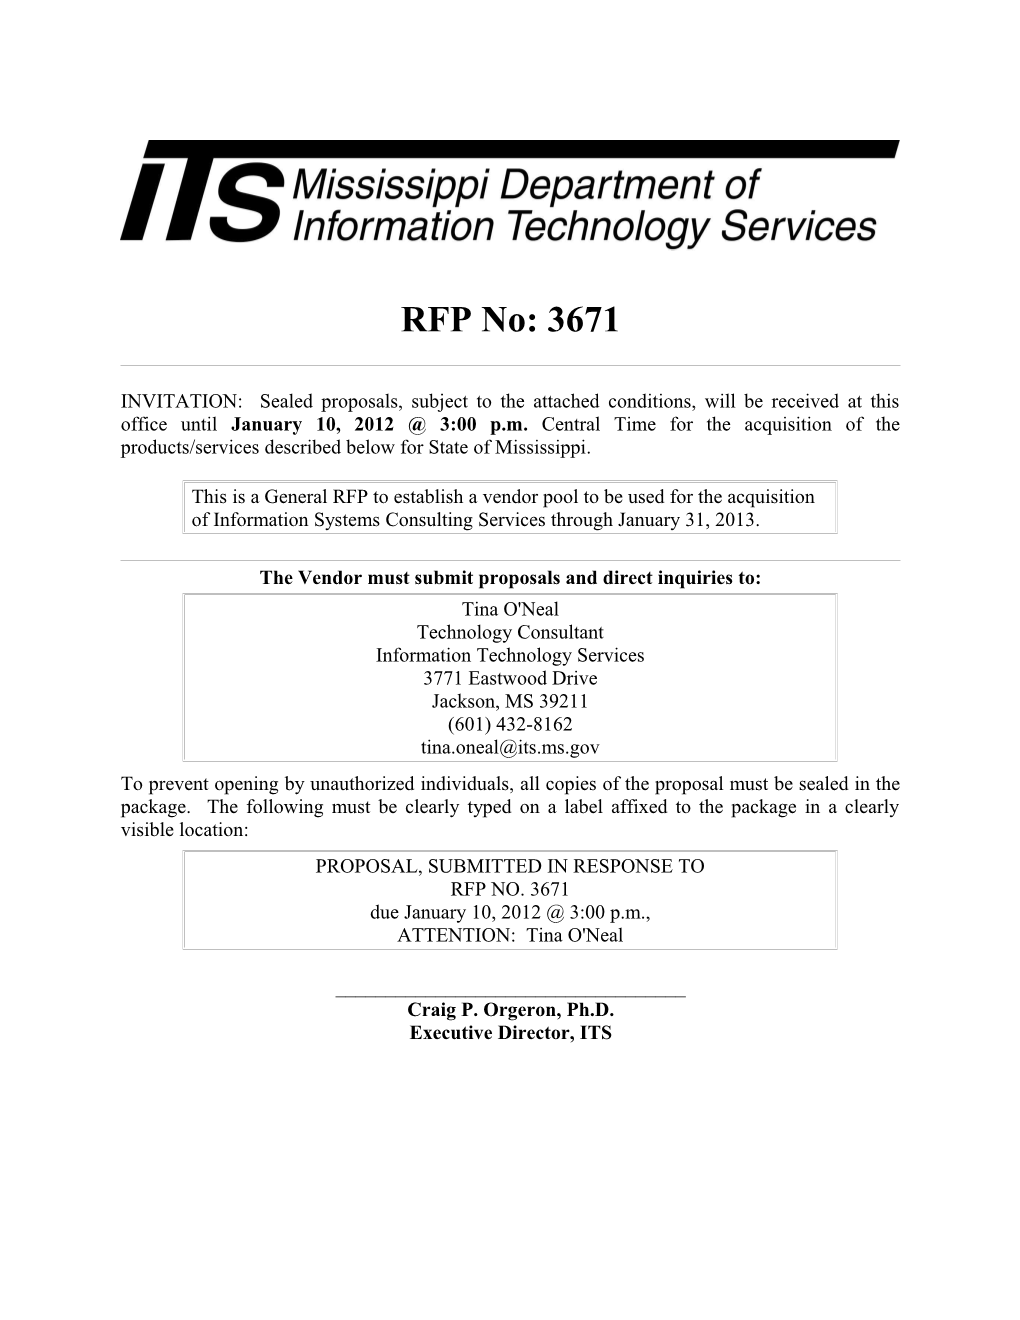 Project No.: General RFP for Information Systems Consulting Services